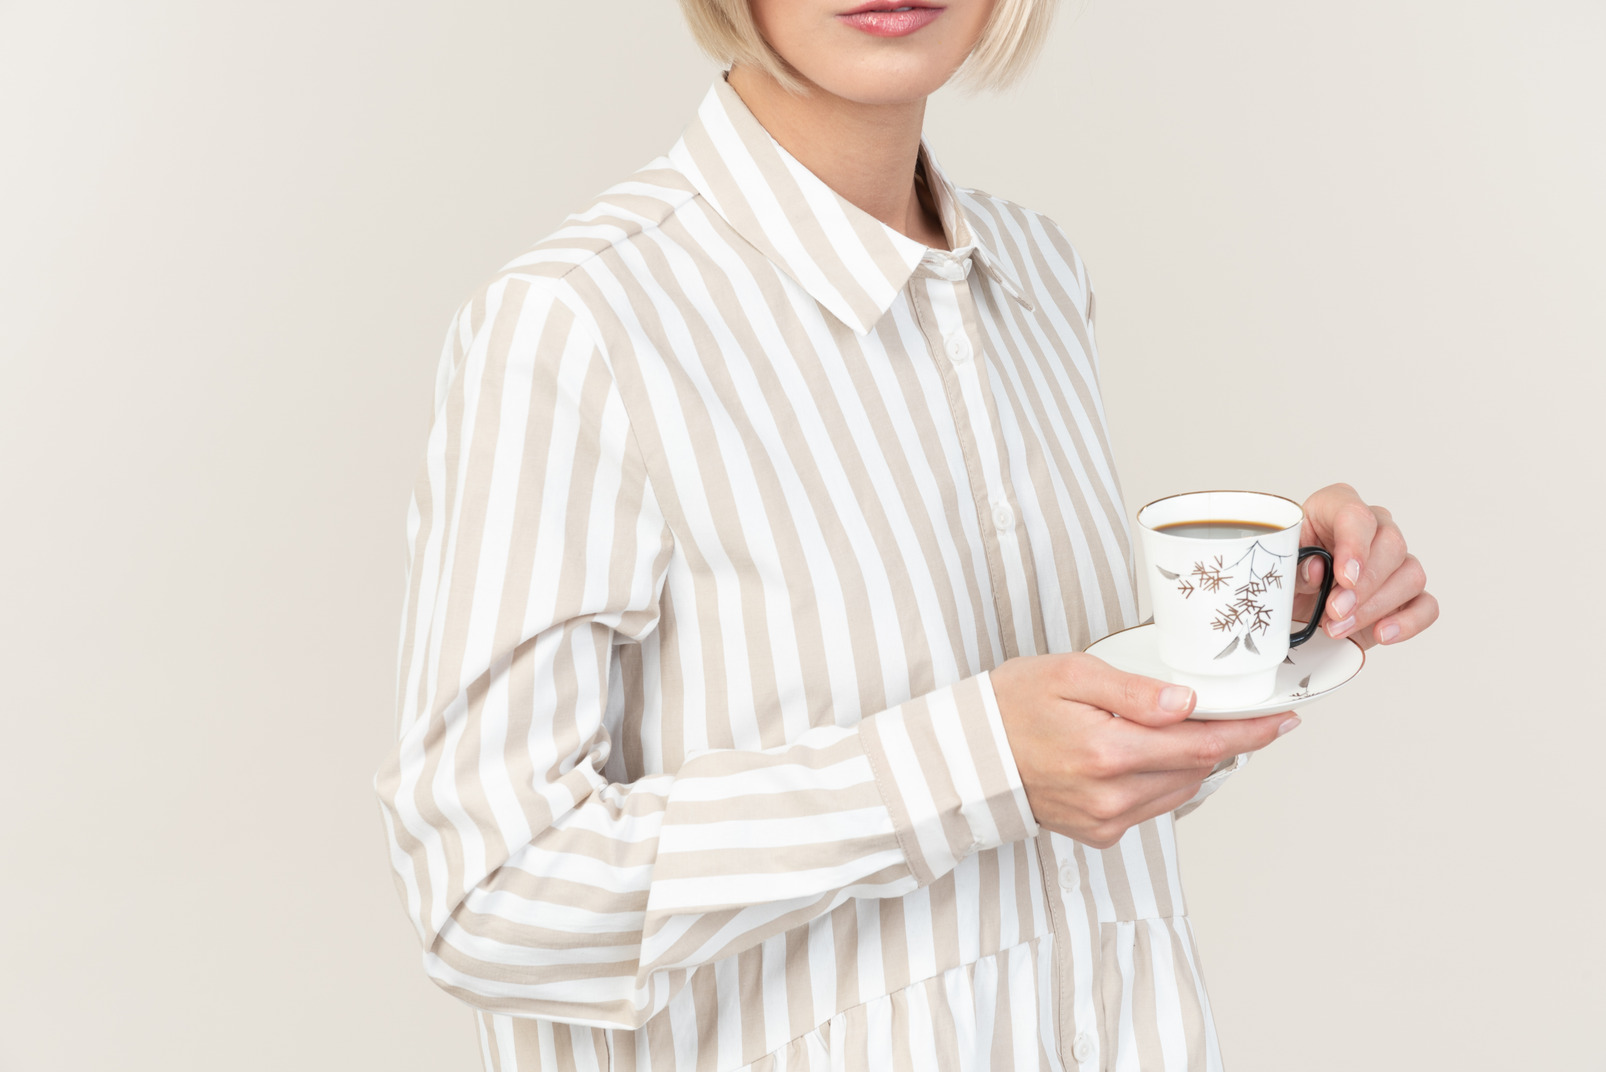 Female hands holding cup of tea